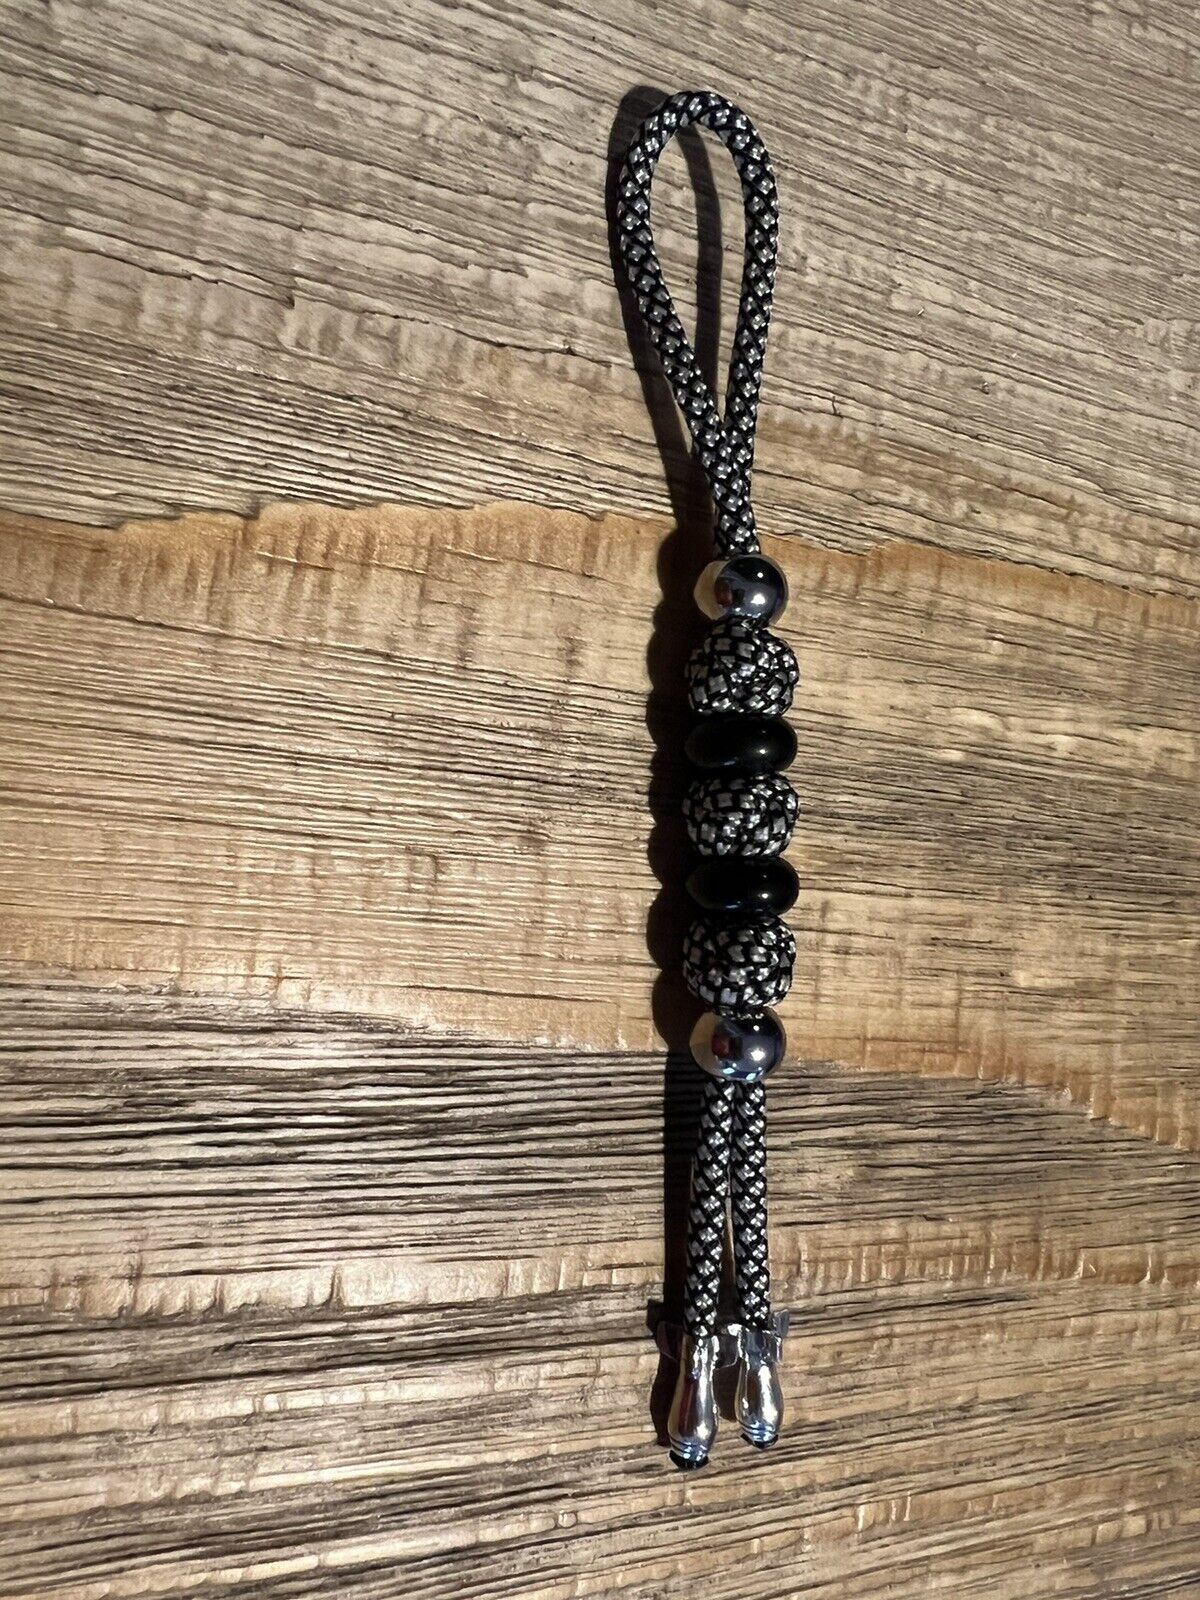 Paracord Knife Lanyard With Sterling Silver Rope End Beads. GD Skulls Creation